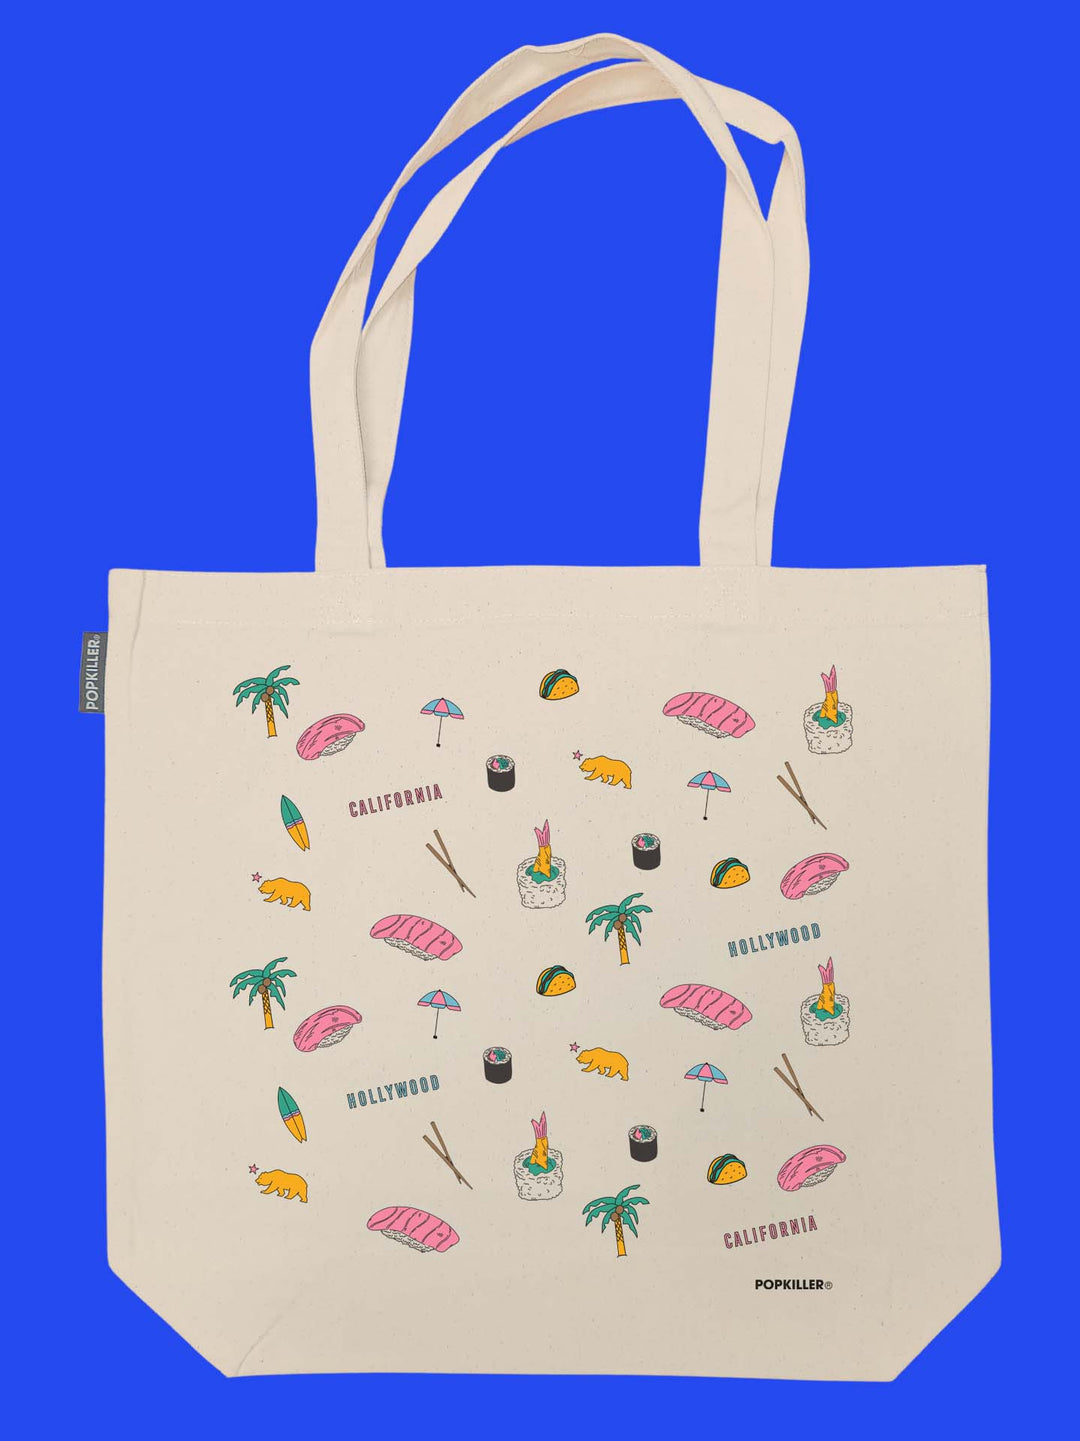 Pop Sushi and Tacos Tote Bag